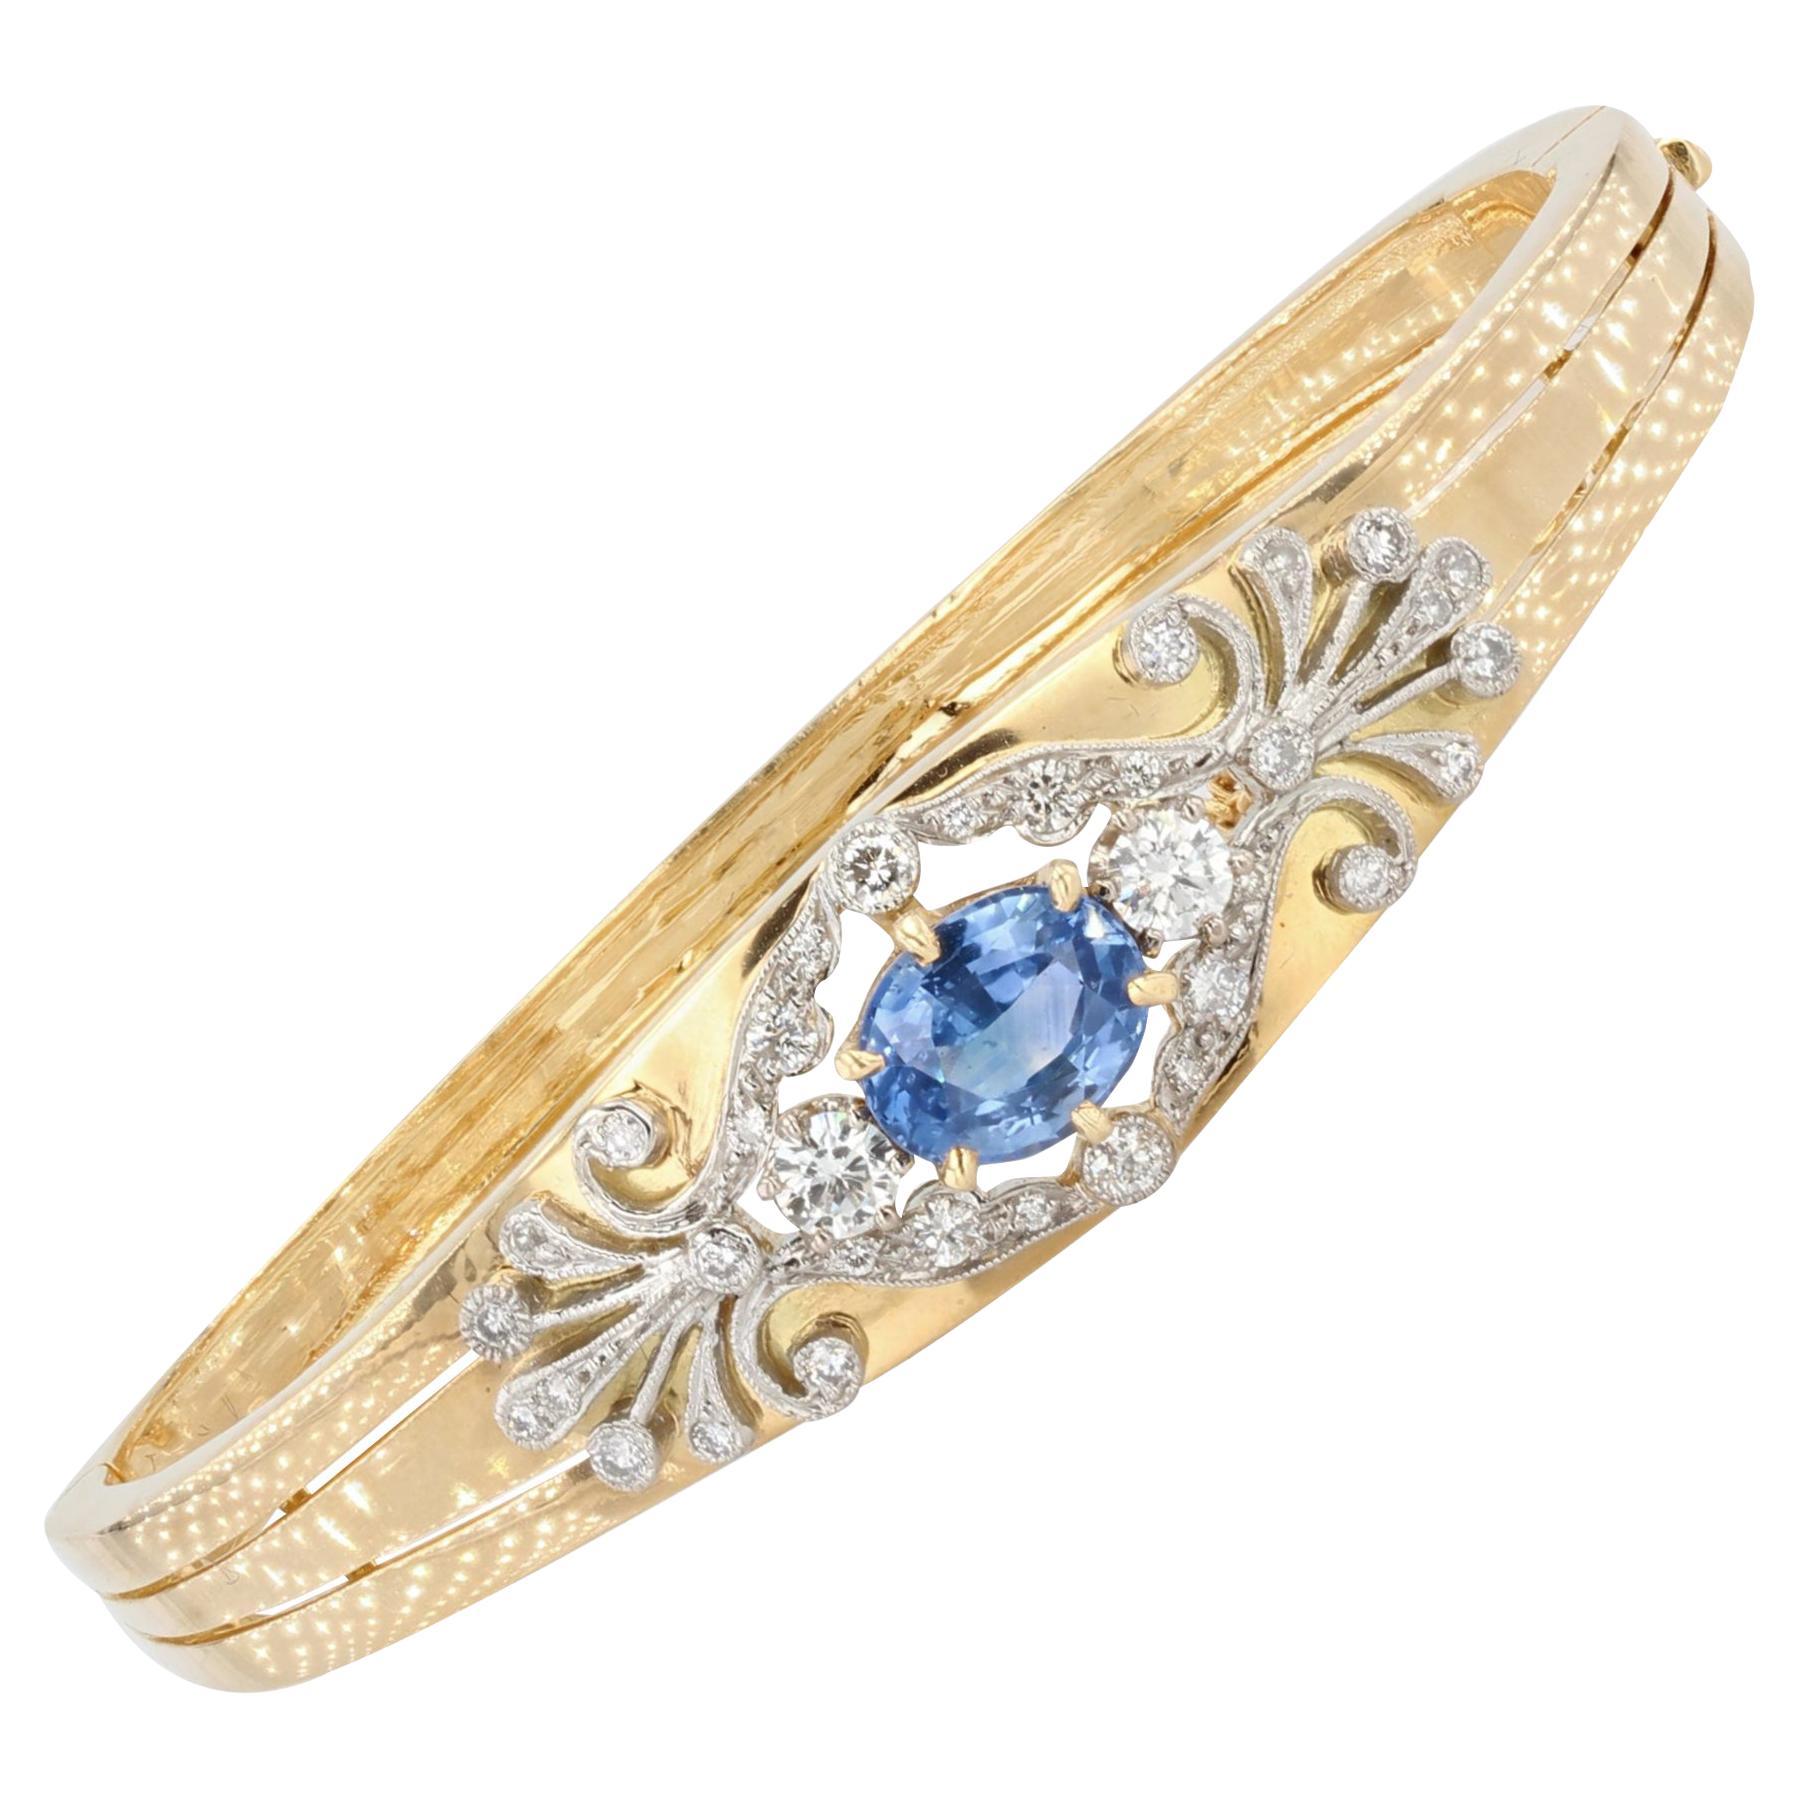 Gold Bangle Bracelet Set with Diamonds and Sapphire For Sale